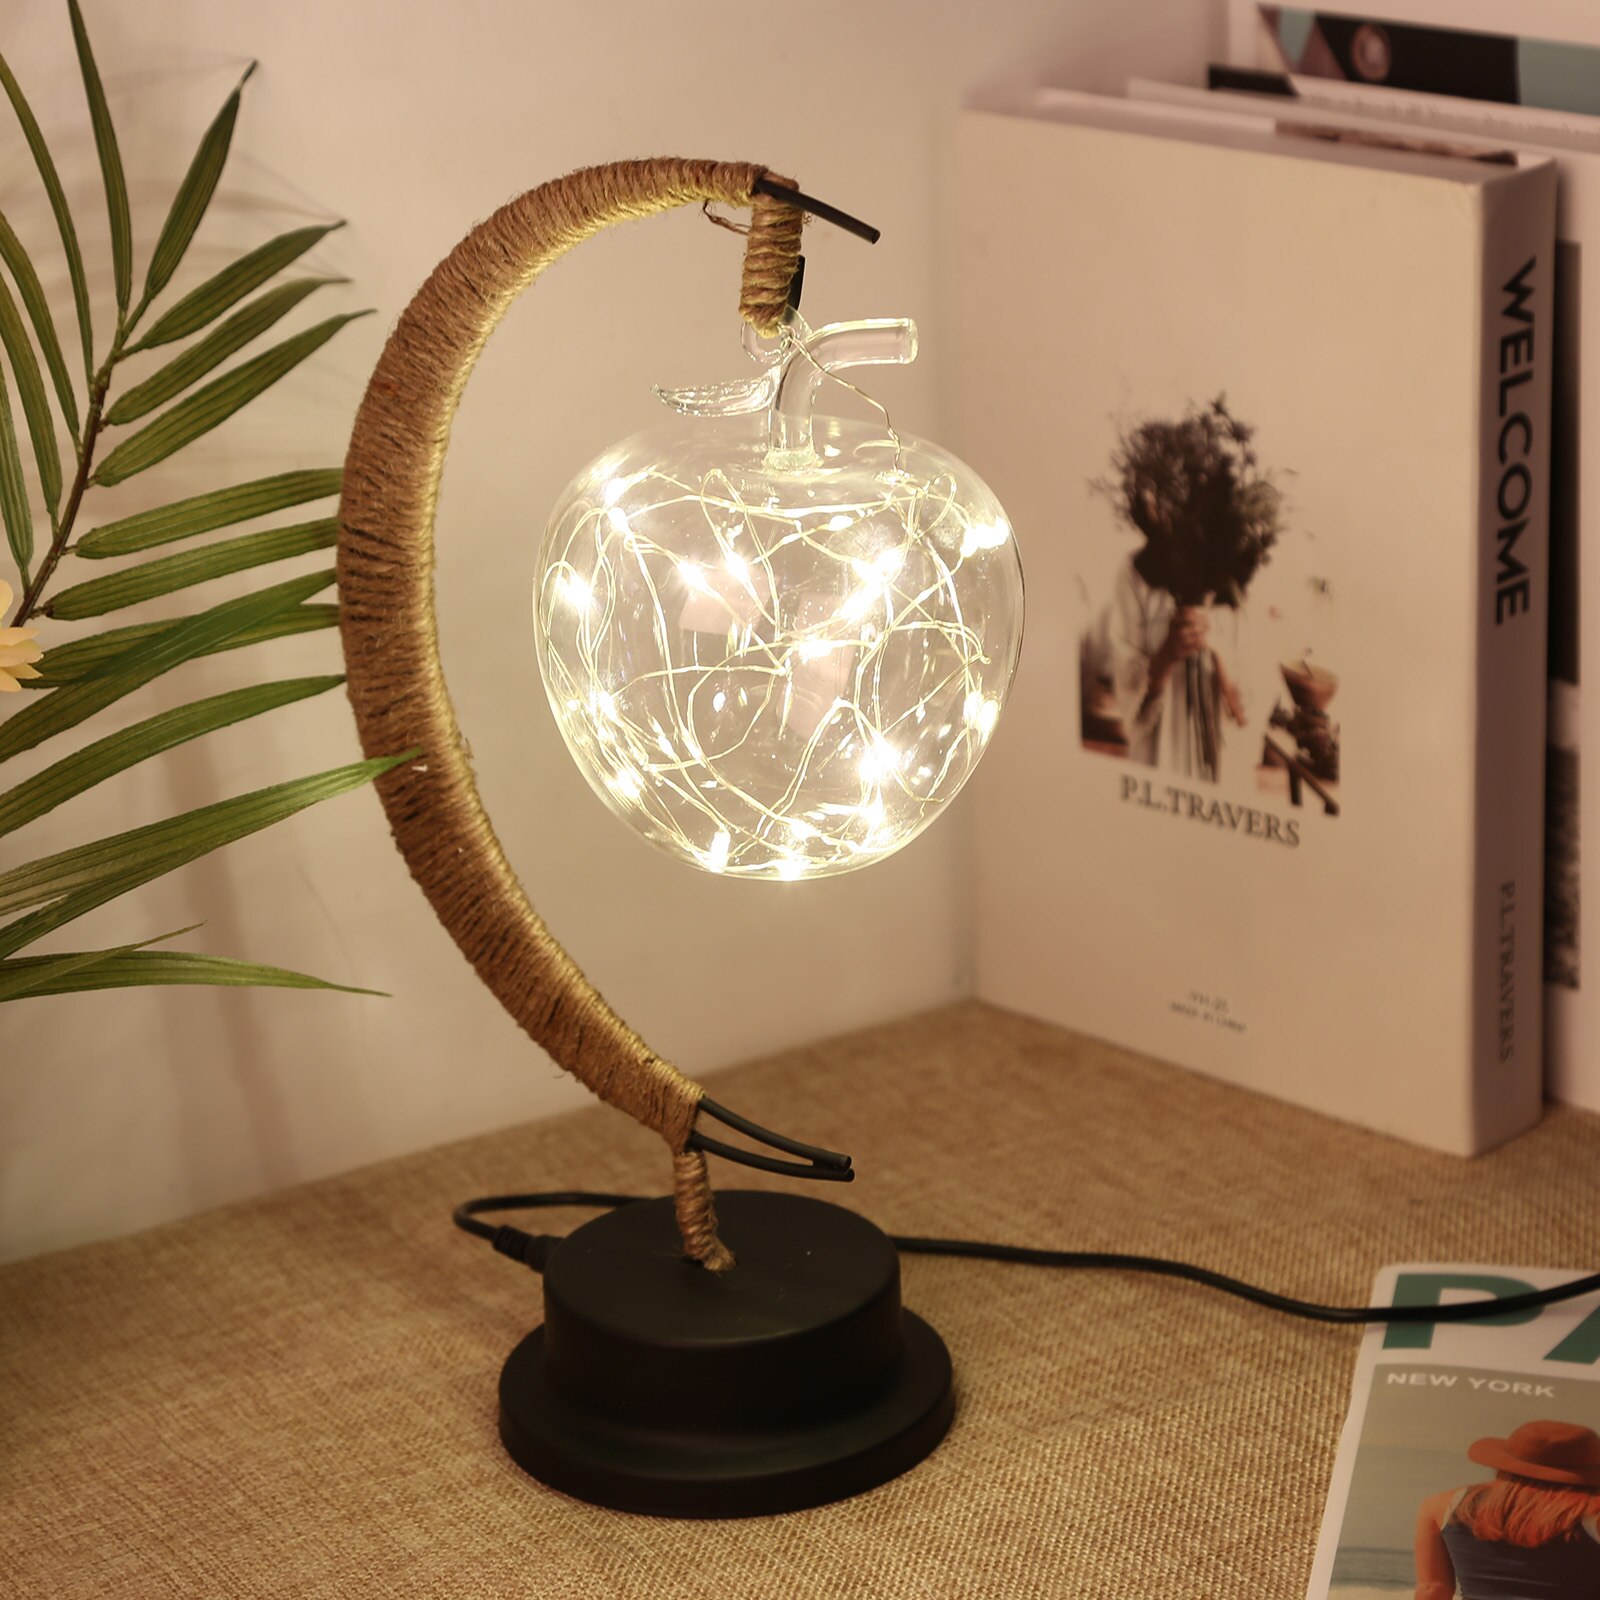 LED Energy Saving Night Light USB Rechargeable 7 Colors Portable Bedside Lamp for Children Bedroom Ornament Table Light Dropship